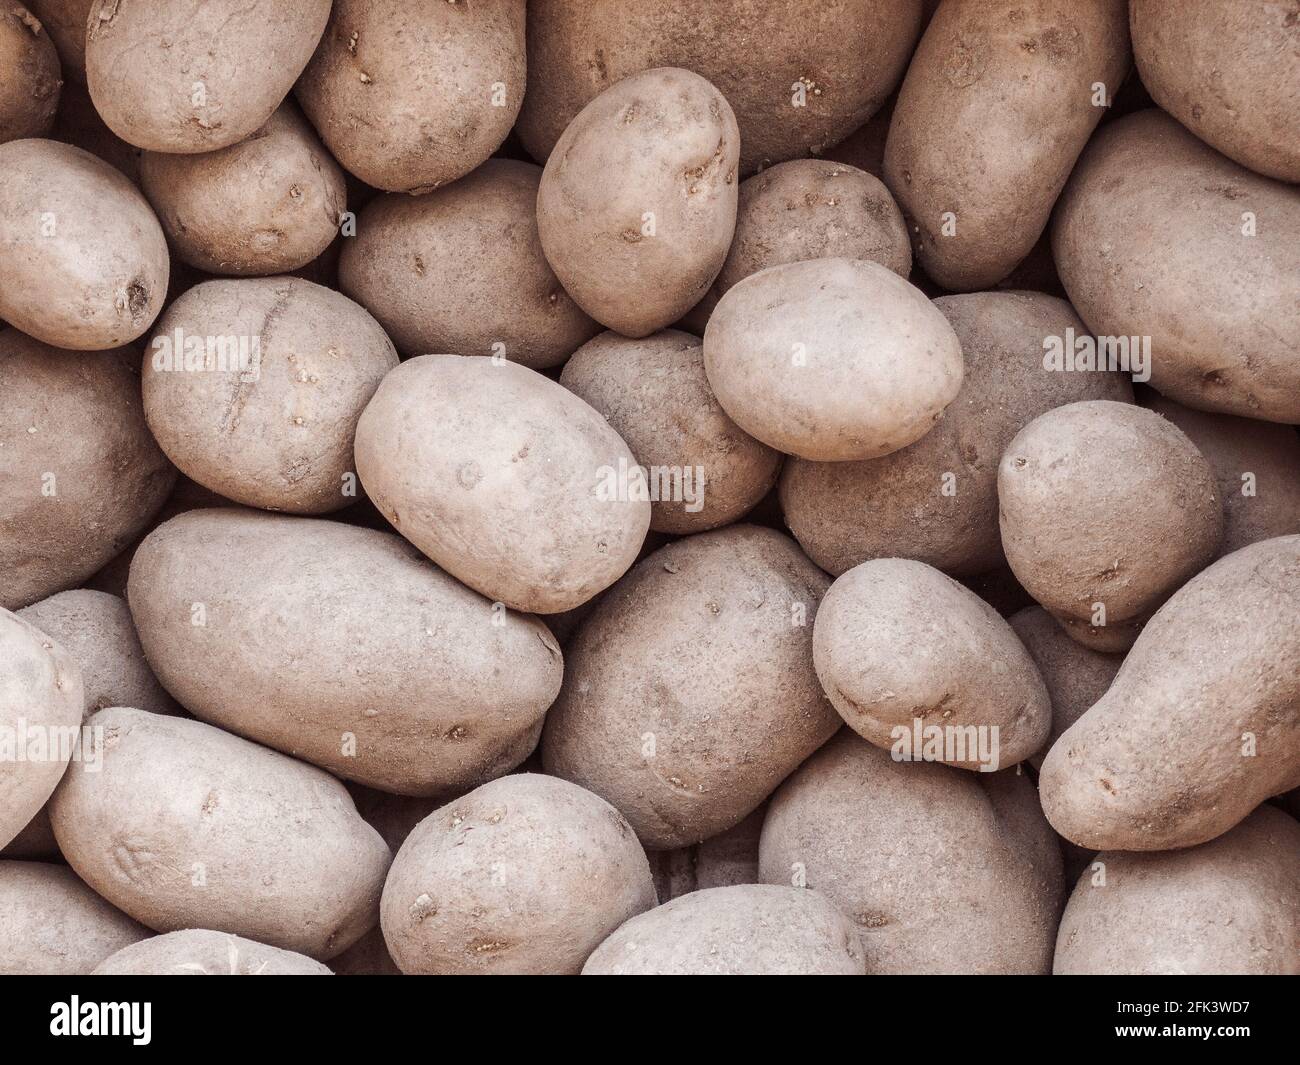 Monalisa potatoes filling the entire frame with copy space Stock Photo